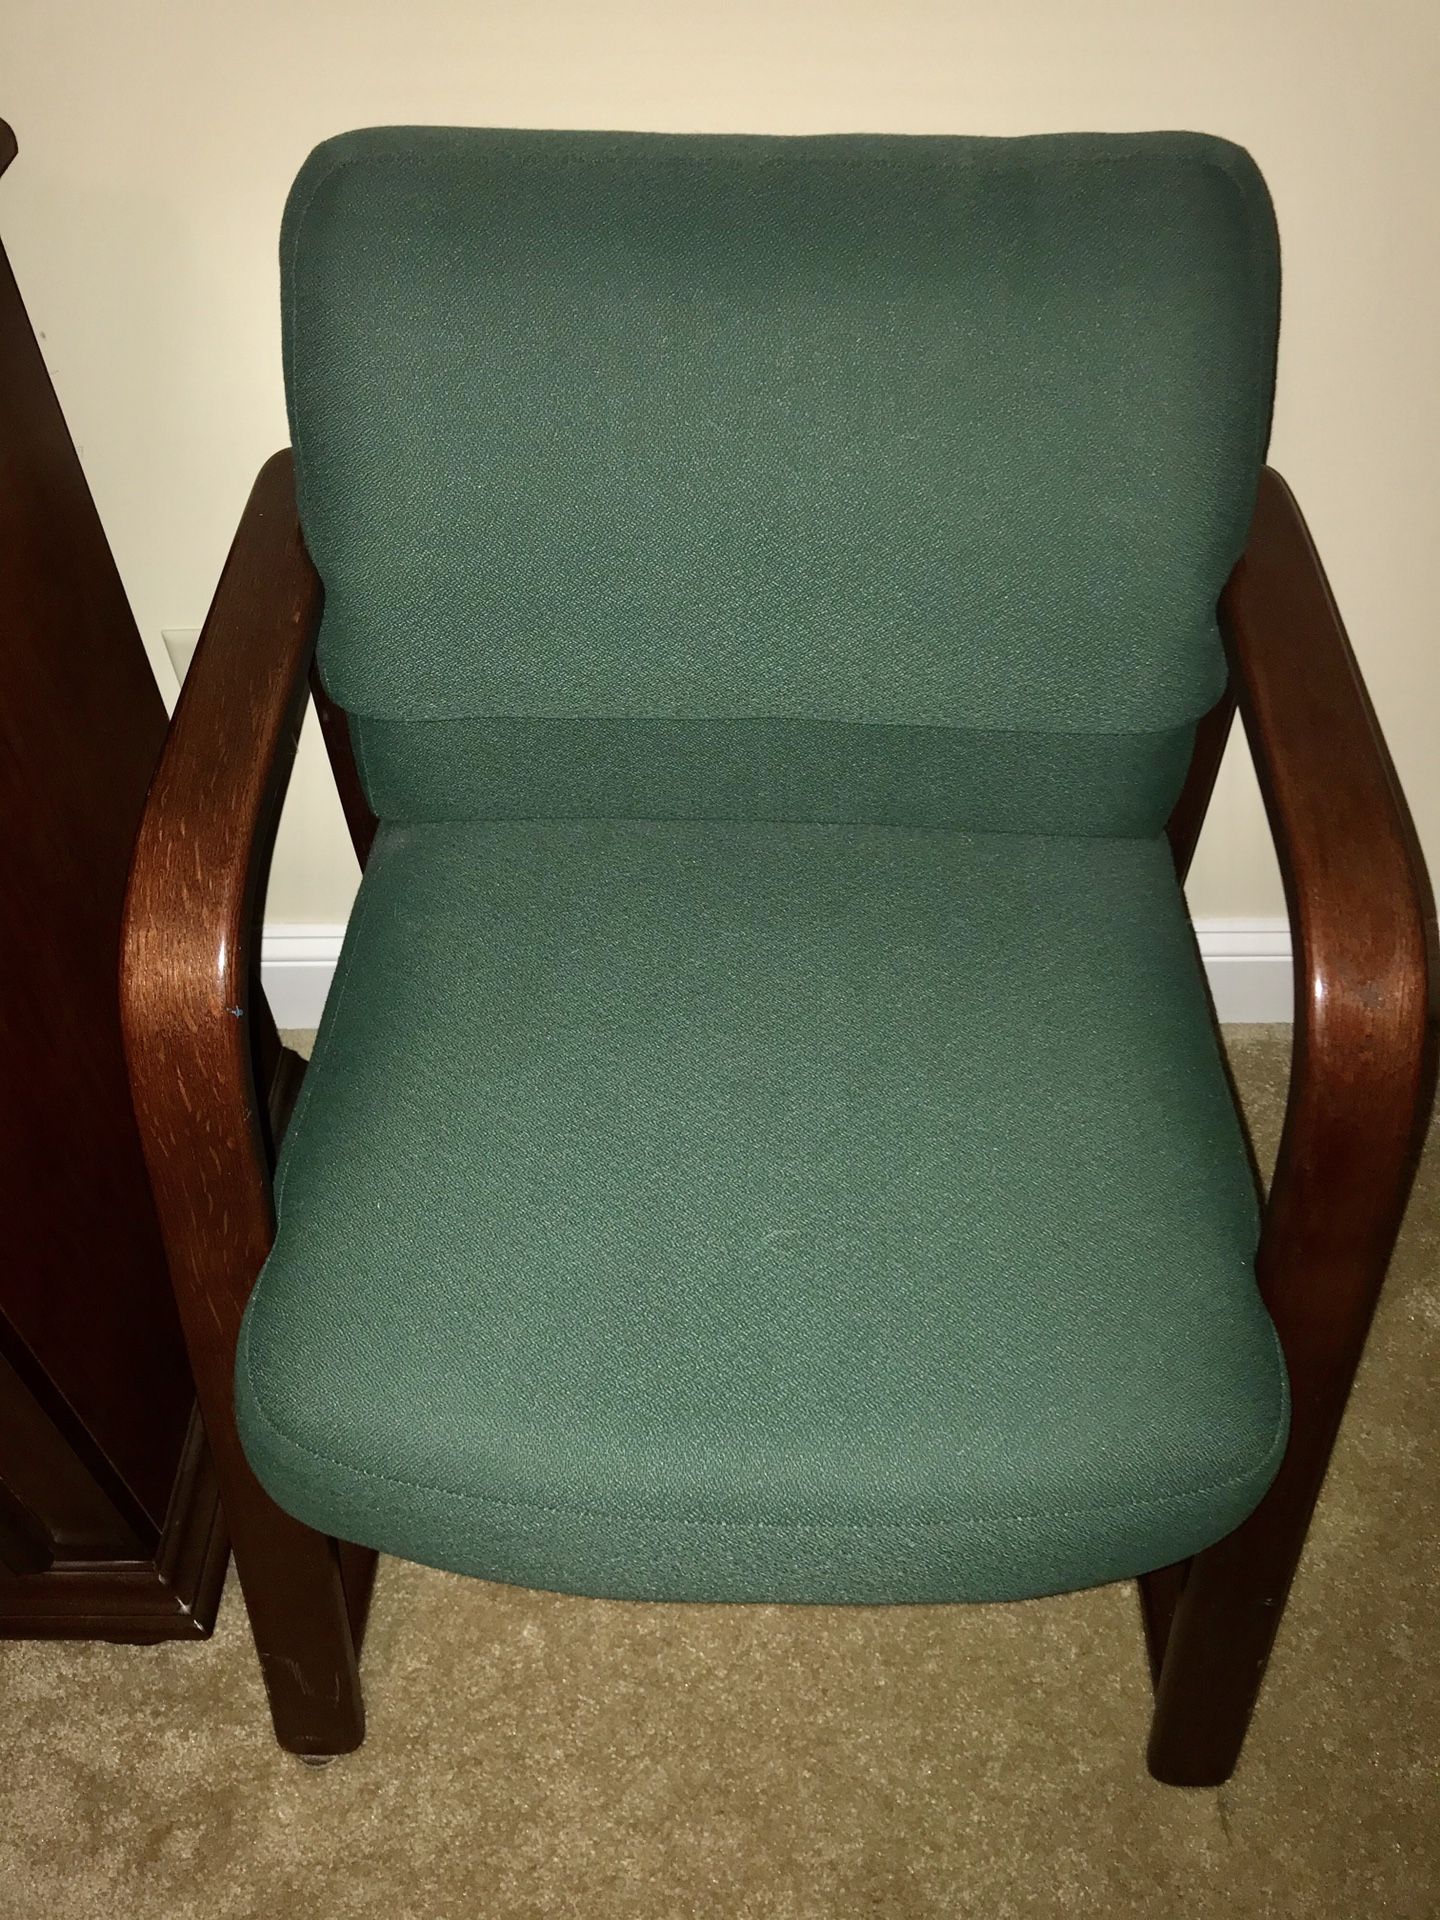 Two hon chairs like new